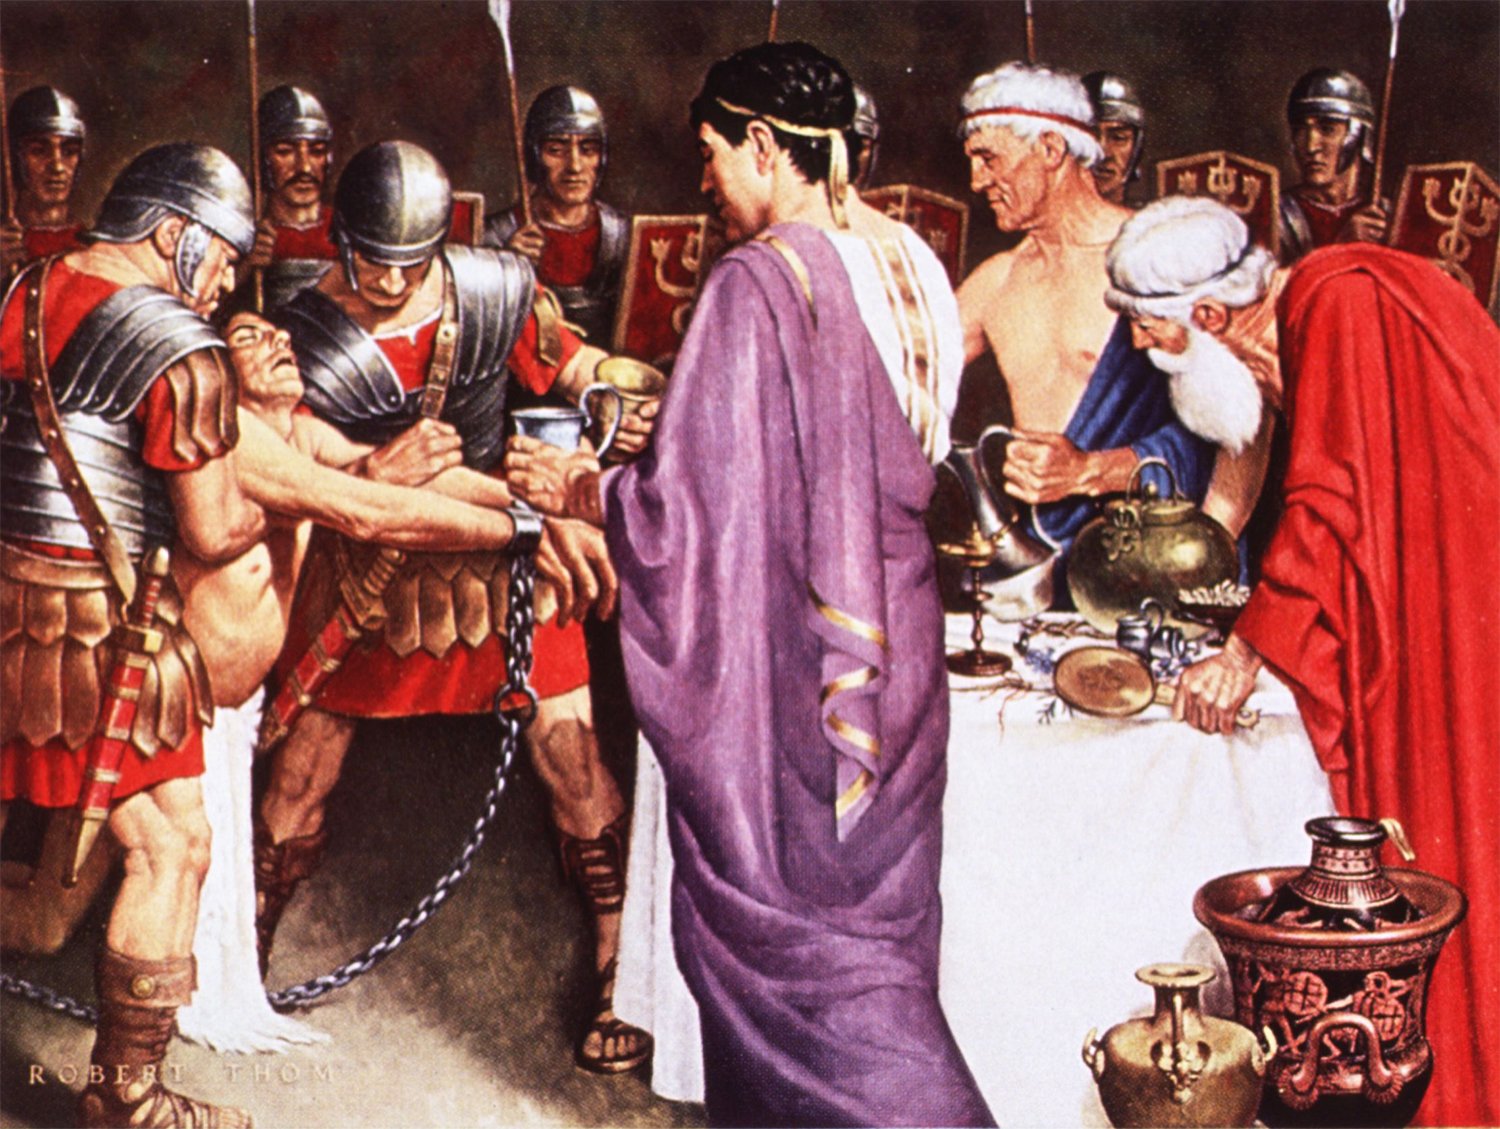 An illustration showing Mithridates VI, dressed in purple, observing as an elderly man administers poison to a chained prisoner, with soldiers in the background.